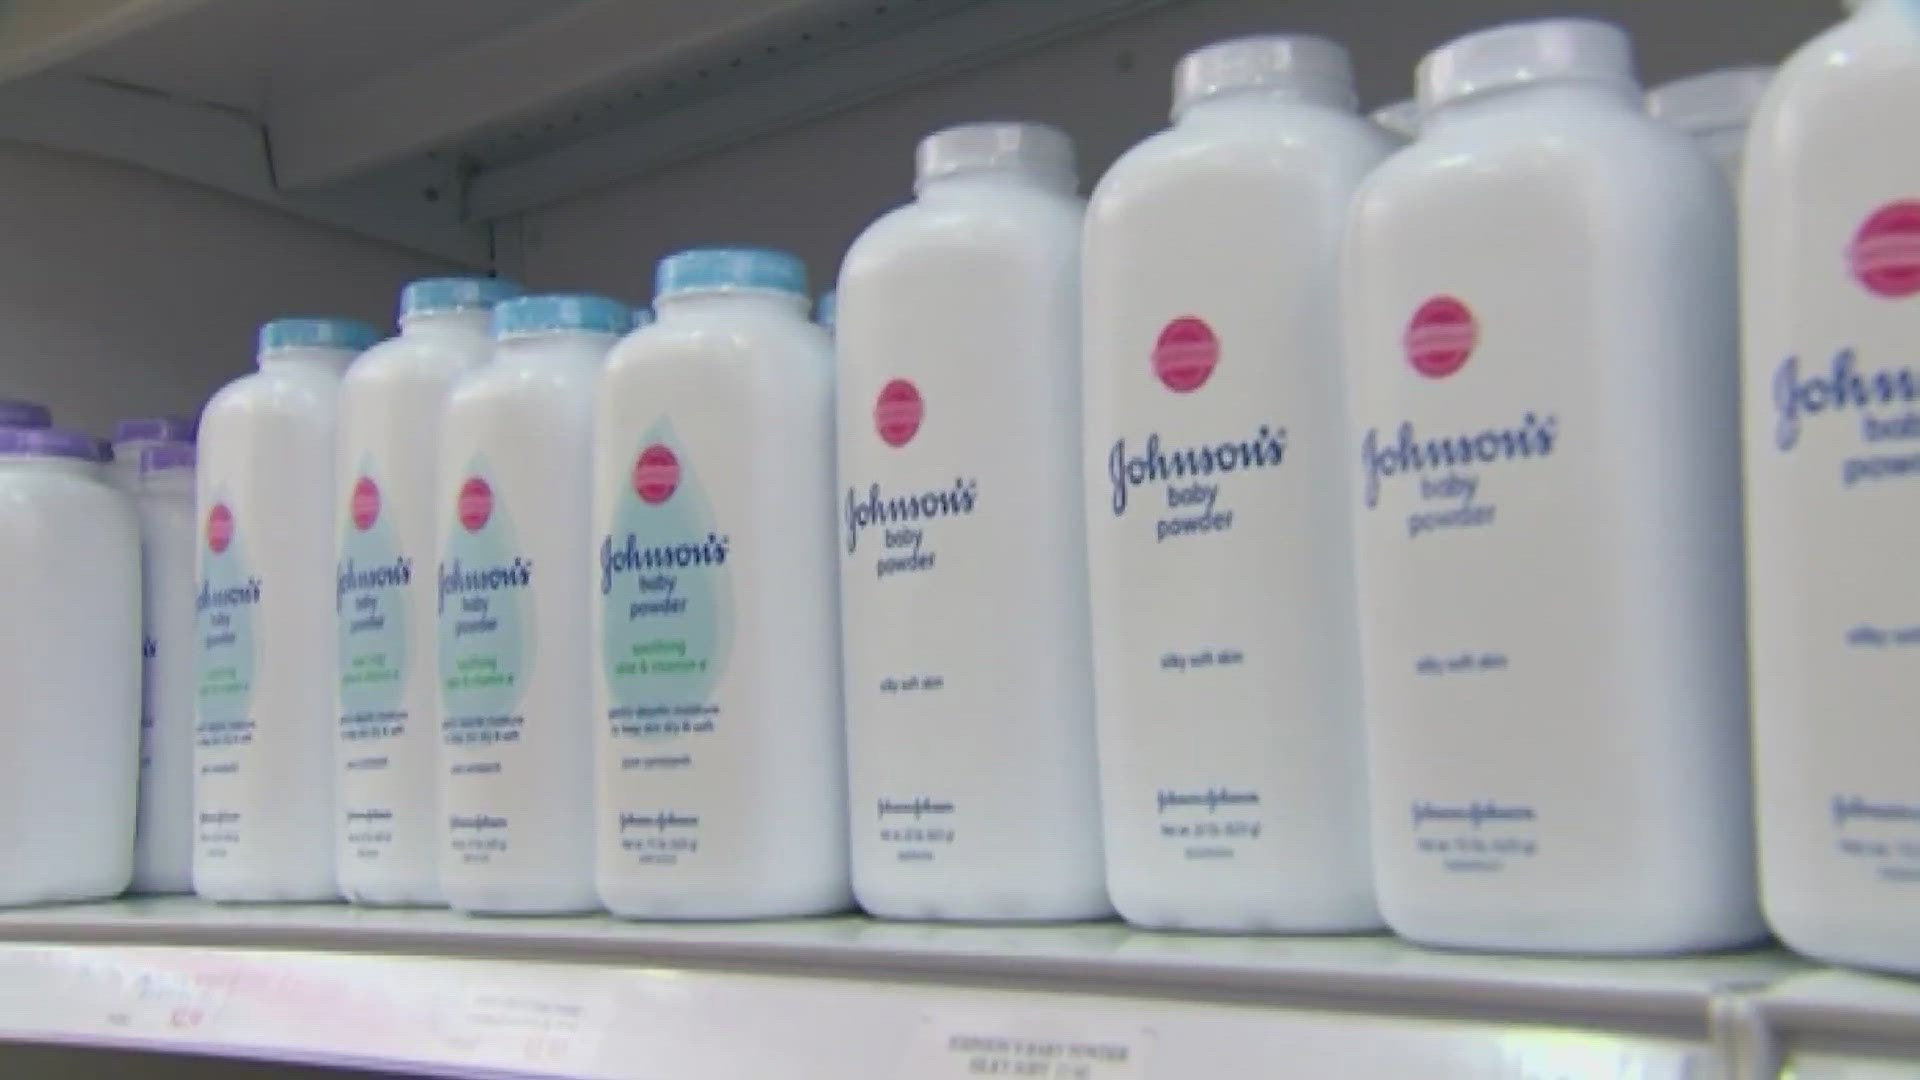 Tens of thousands of cases claim the company's talc products cause cancer.